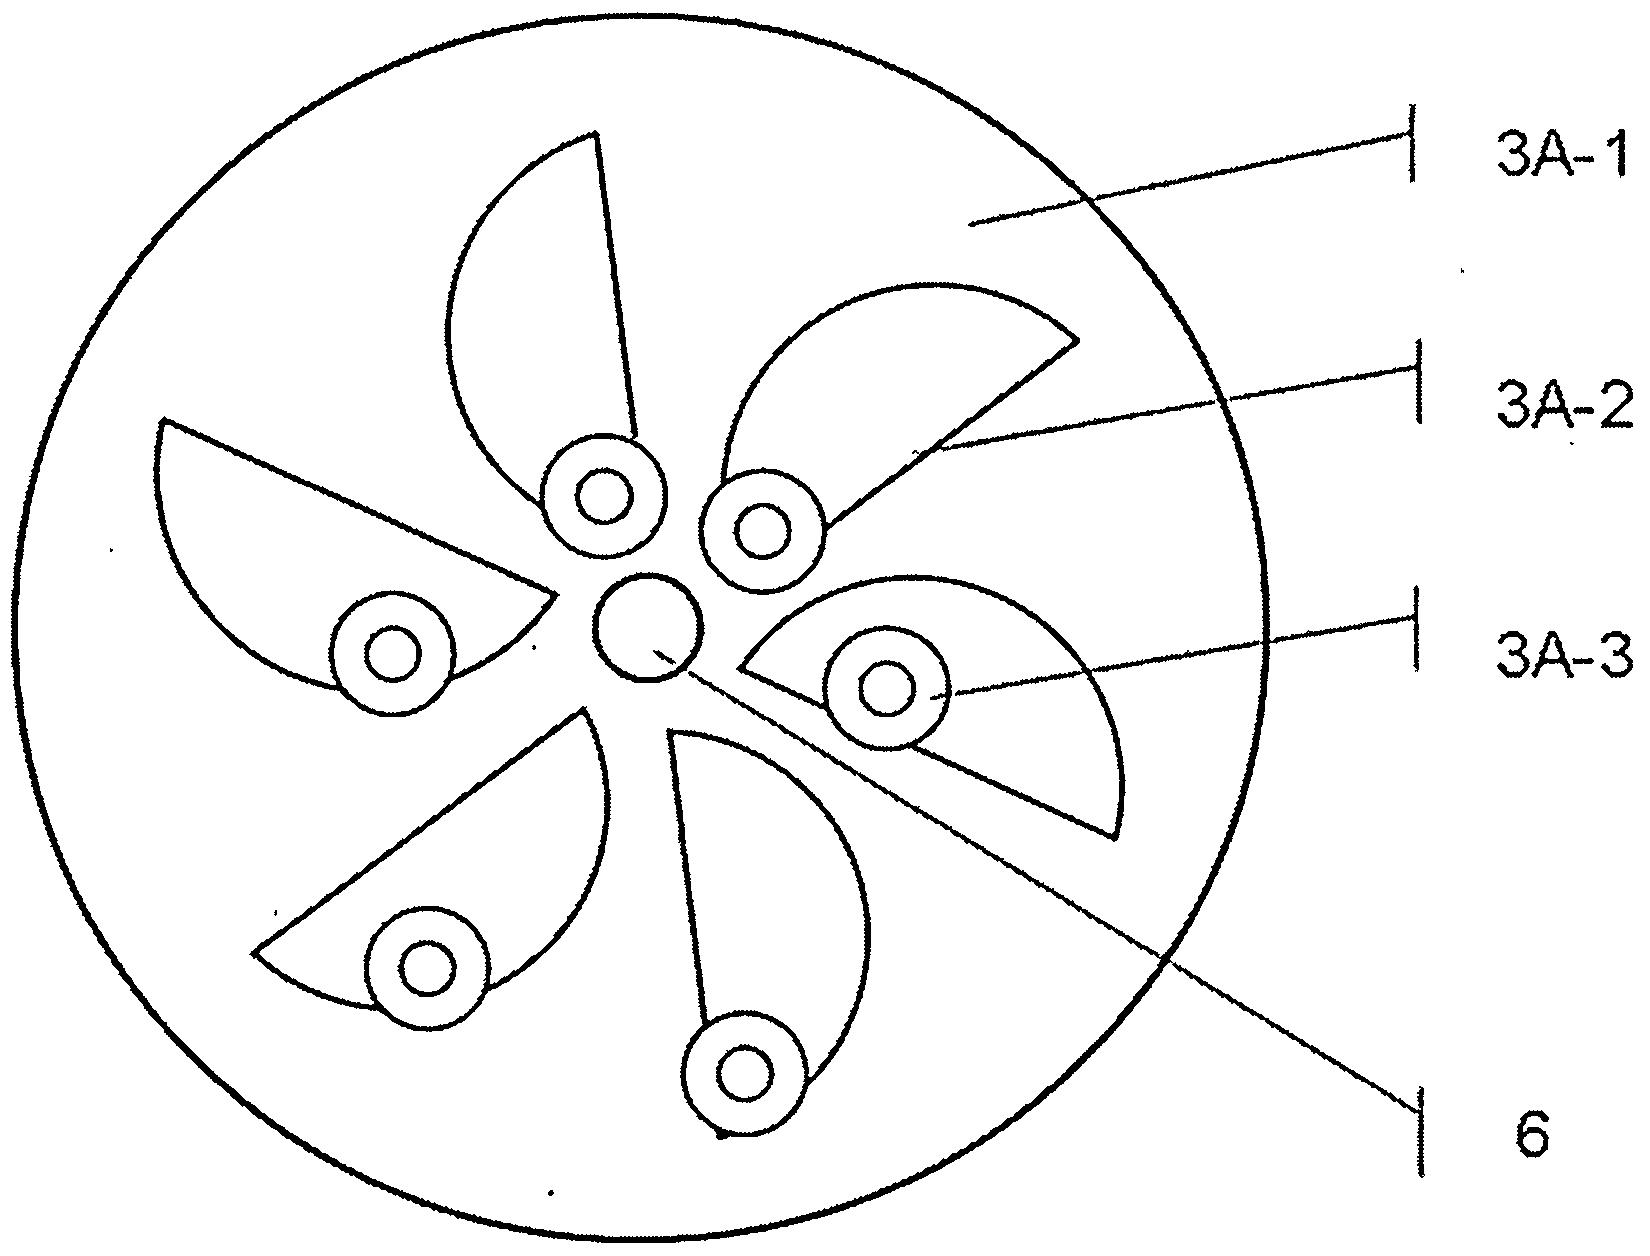 Electric energy multiplication device named 'electric multiplication motor'